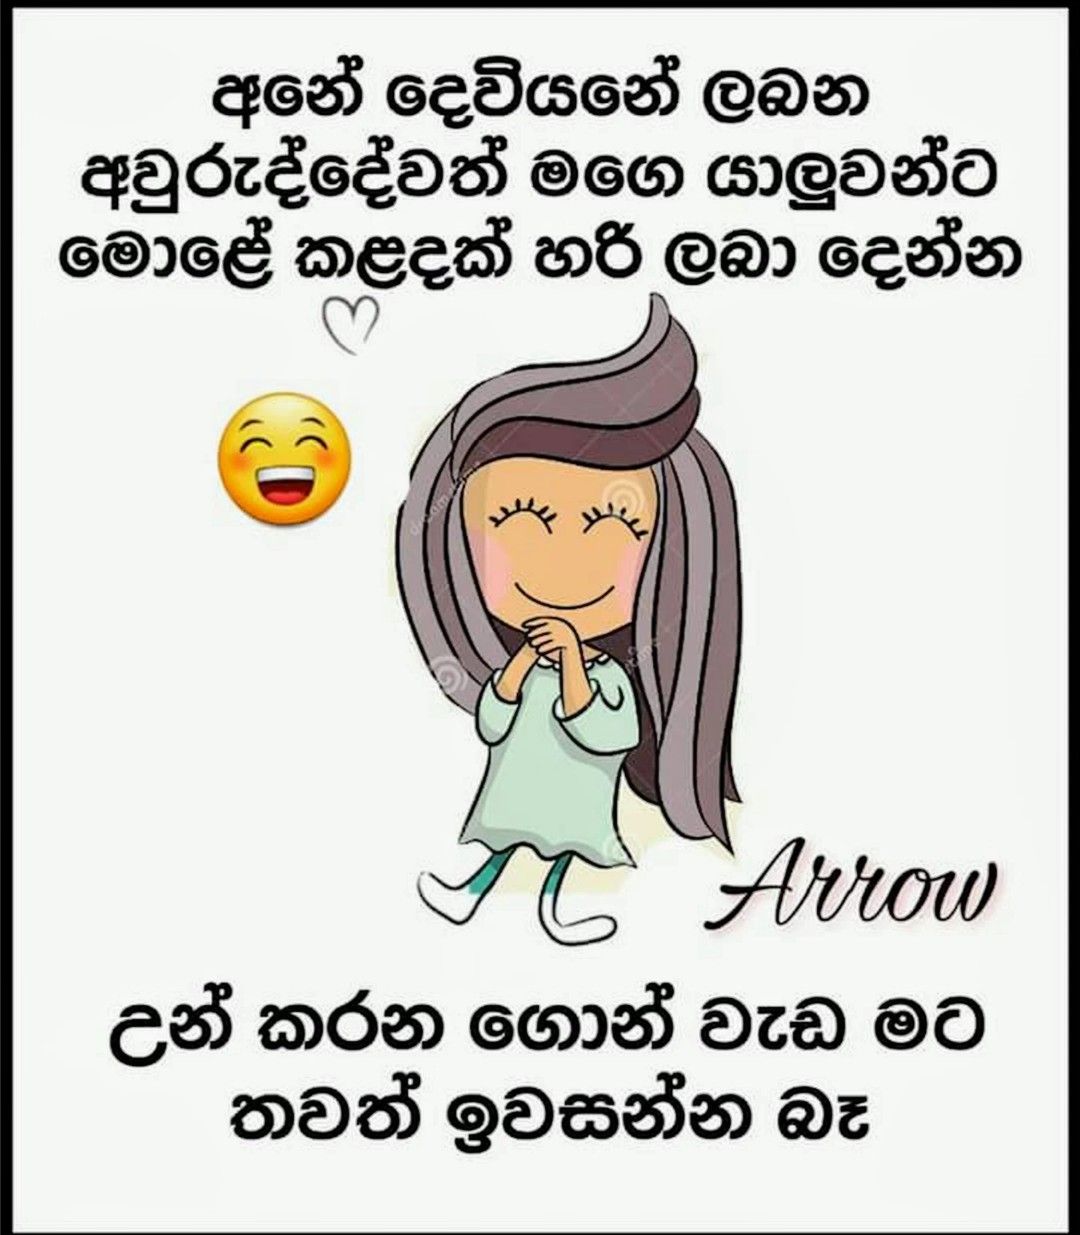 Sinhala Funny Quotes Image